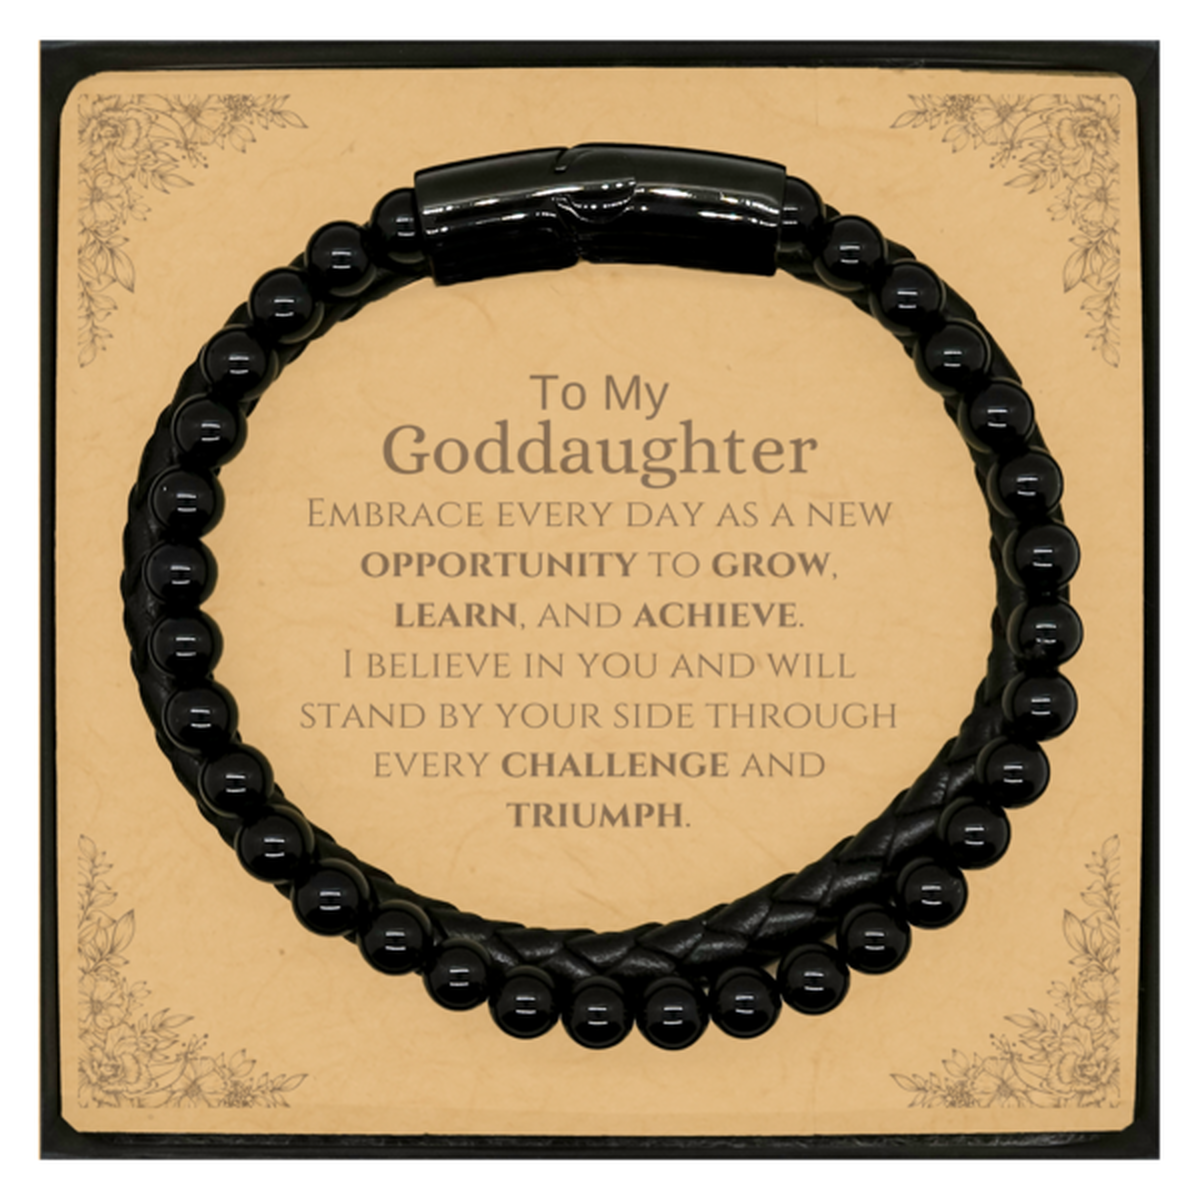 To My Goddaughter Gifts, I believe in you and will stand by your side, Inspirational Stone Leather Bracelets For Goddaughter, Birthday Christmas Motivational Goddaughter Gifts